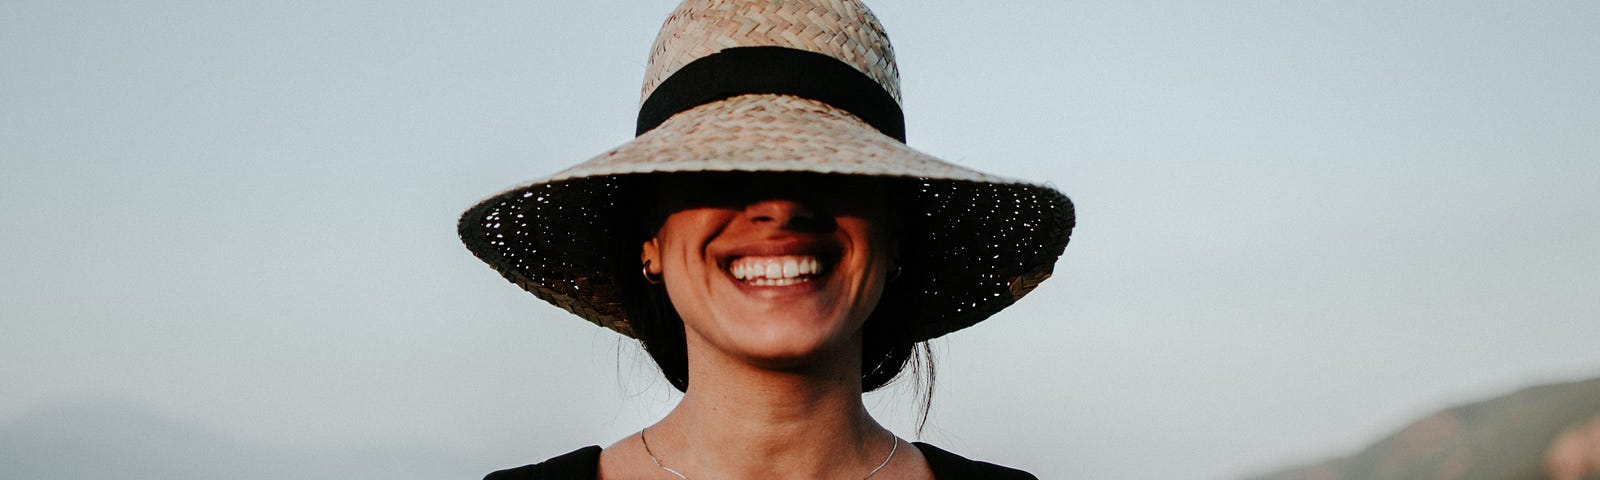 A woman smiling at the beach with a big hat covering half of her face